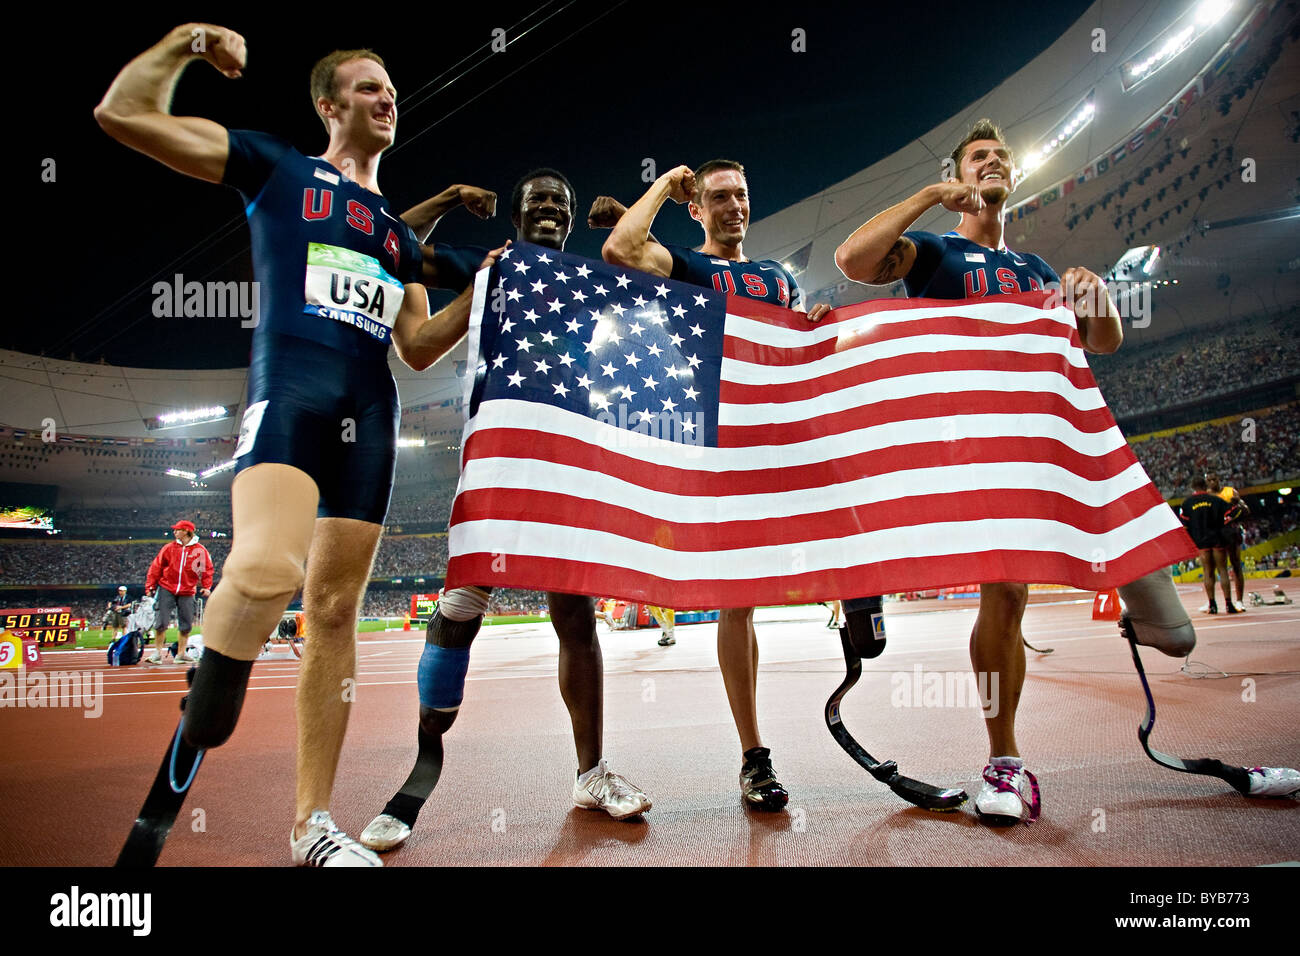 USA team members celebrate after their victory in the men's T44 4x100m final relay race at the Beijing 2008 Paralympic Games; Stock Photo